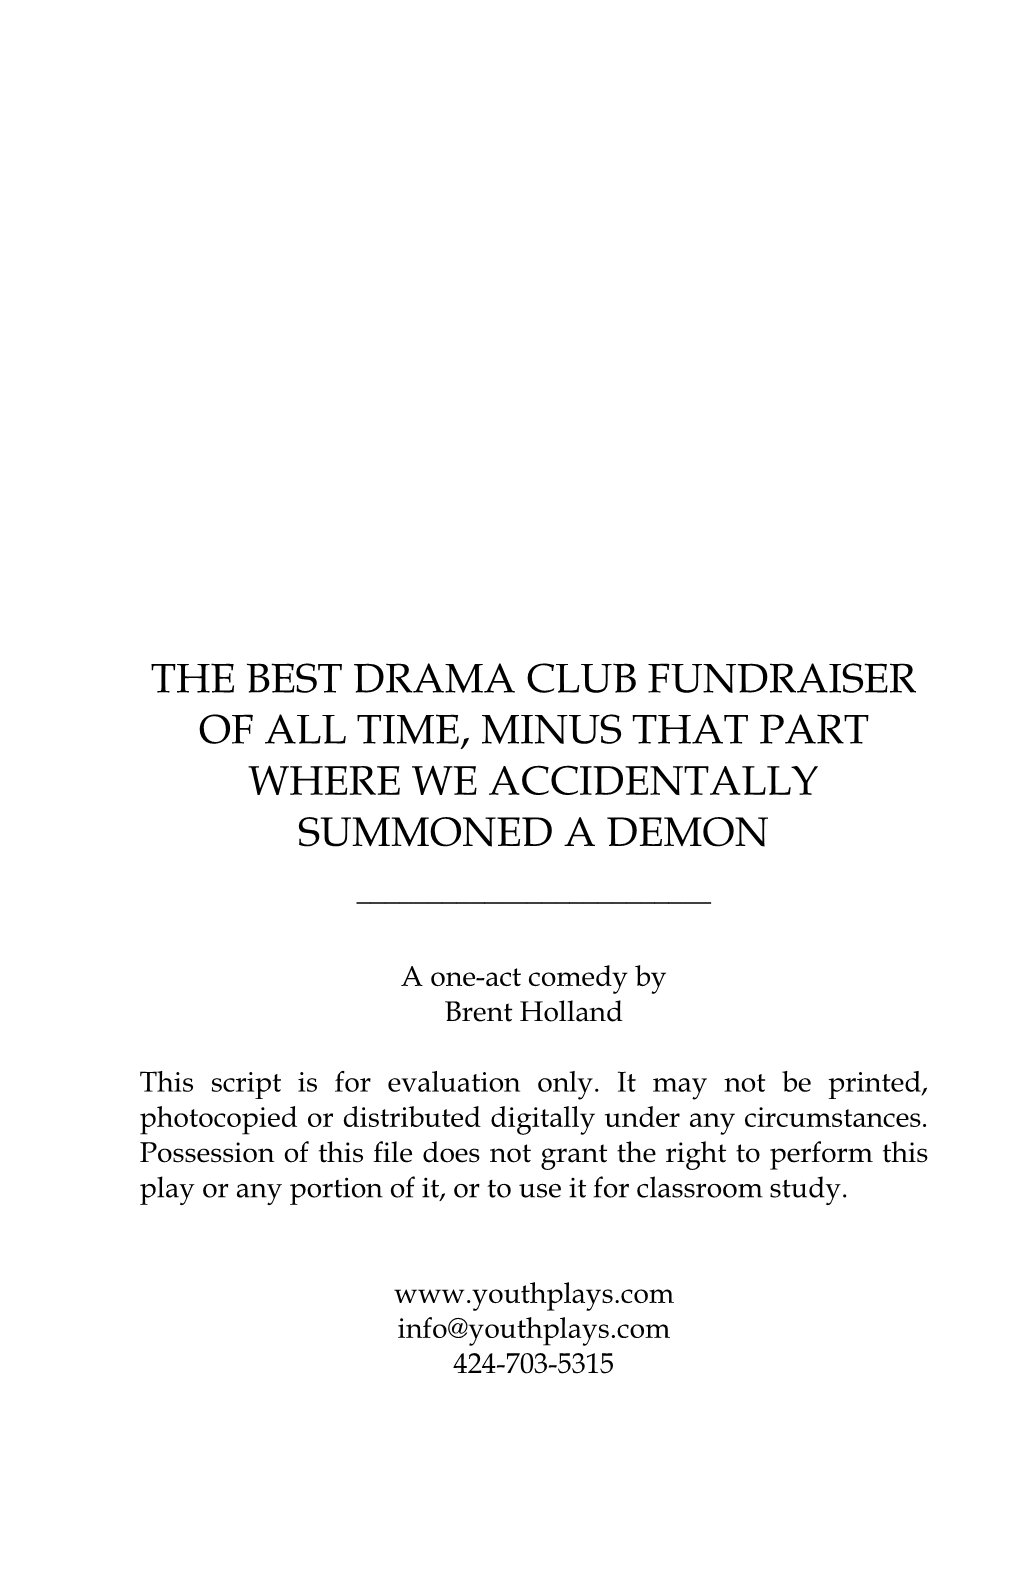 The Best Drama Club Fundraiser of All Time, Minus That Part Where We Accidentally Summoned a Demon ______